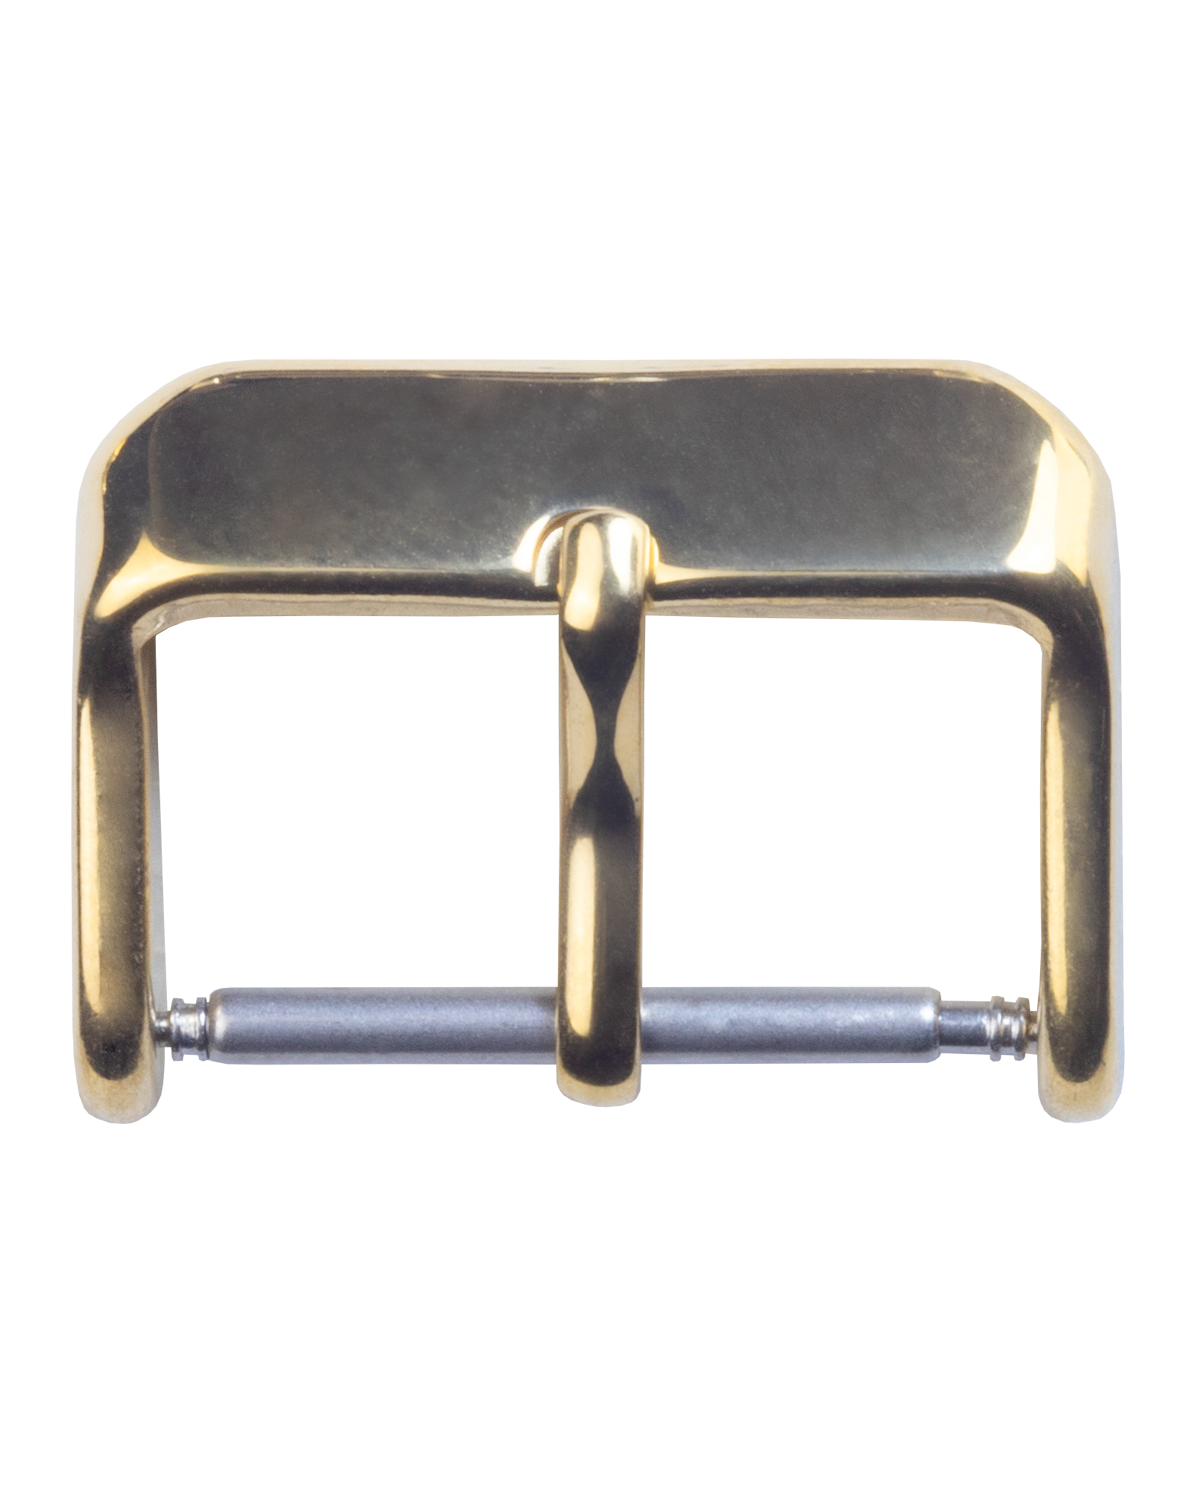 Chrono pin buckle, gold plated